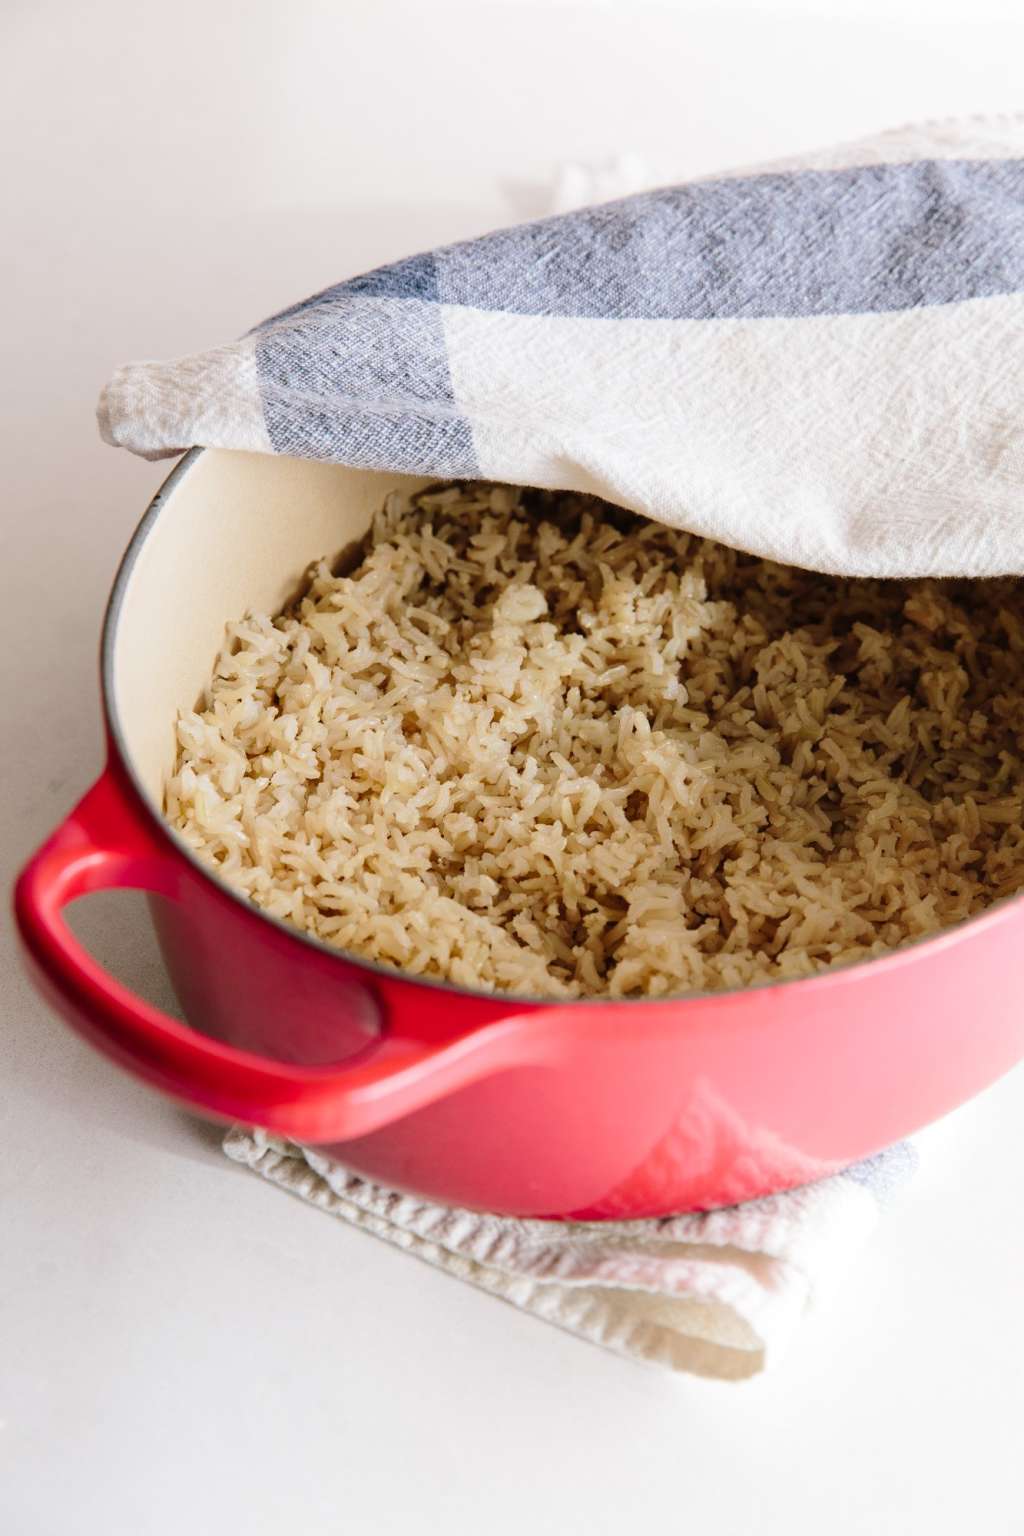 How To Make Easy Brown Rice in the Oven | Kitchn